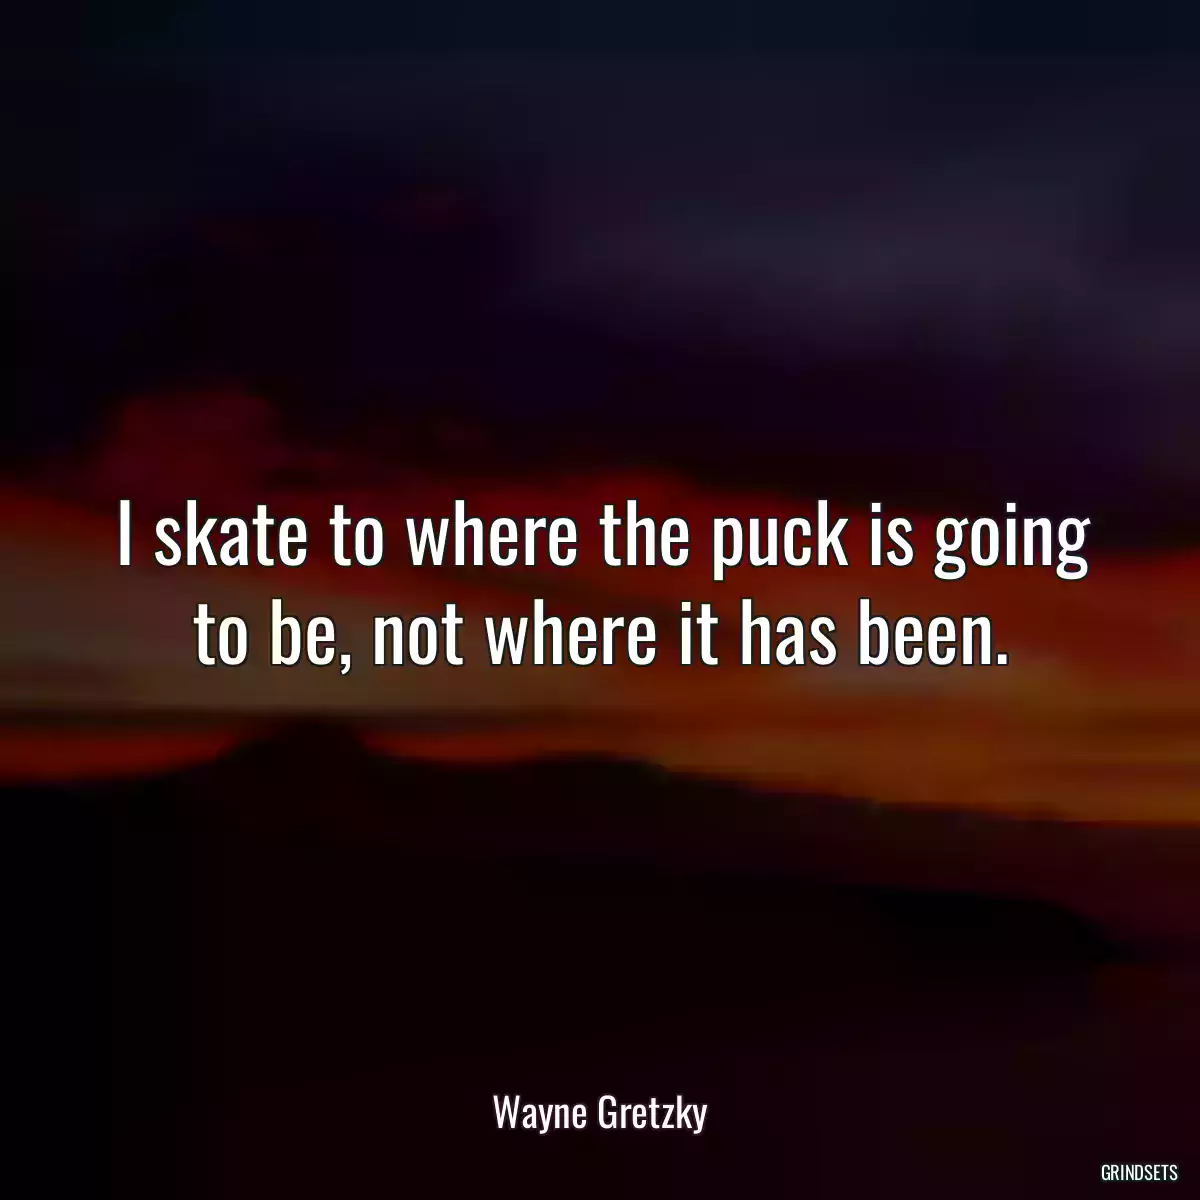 I skate to where the puck is going to be, not where it has been.